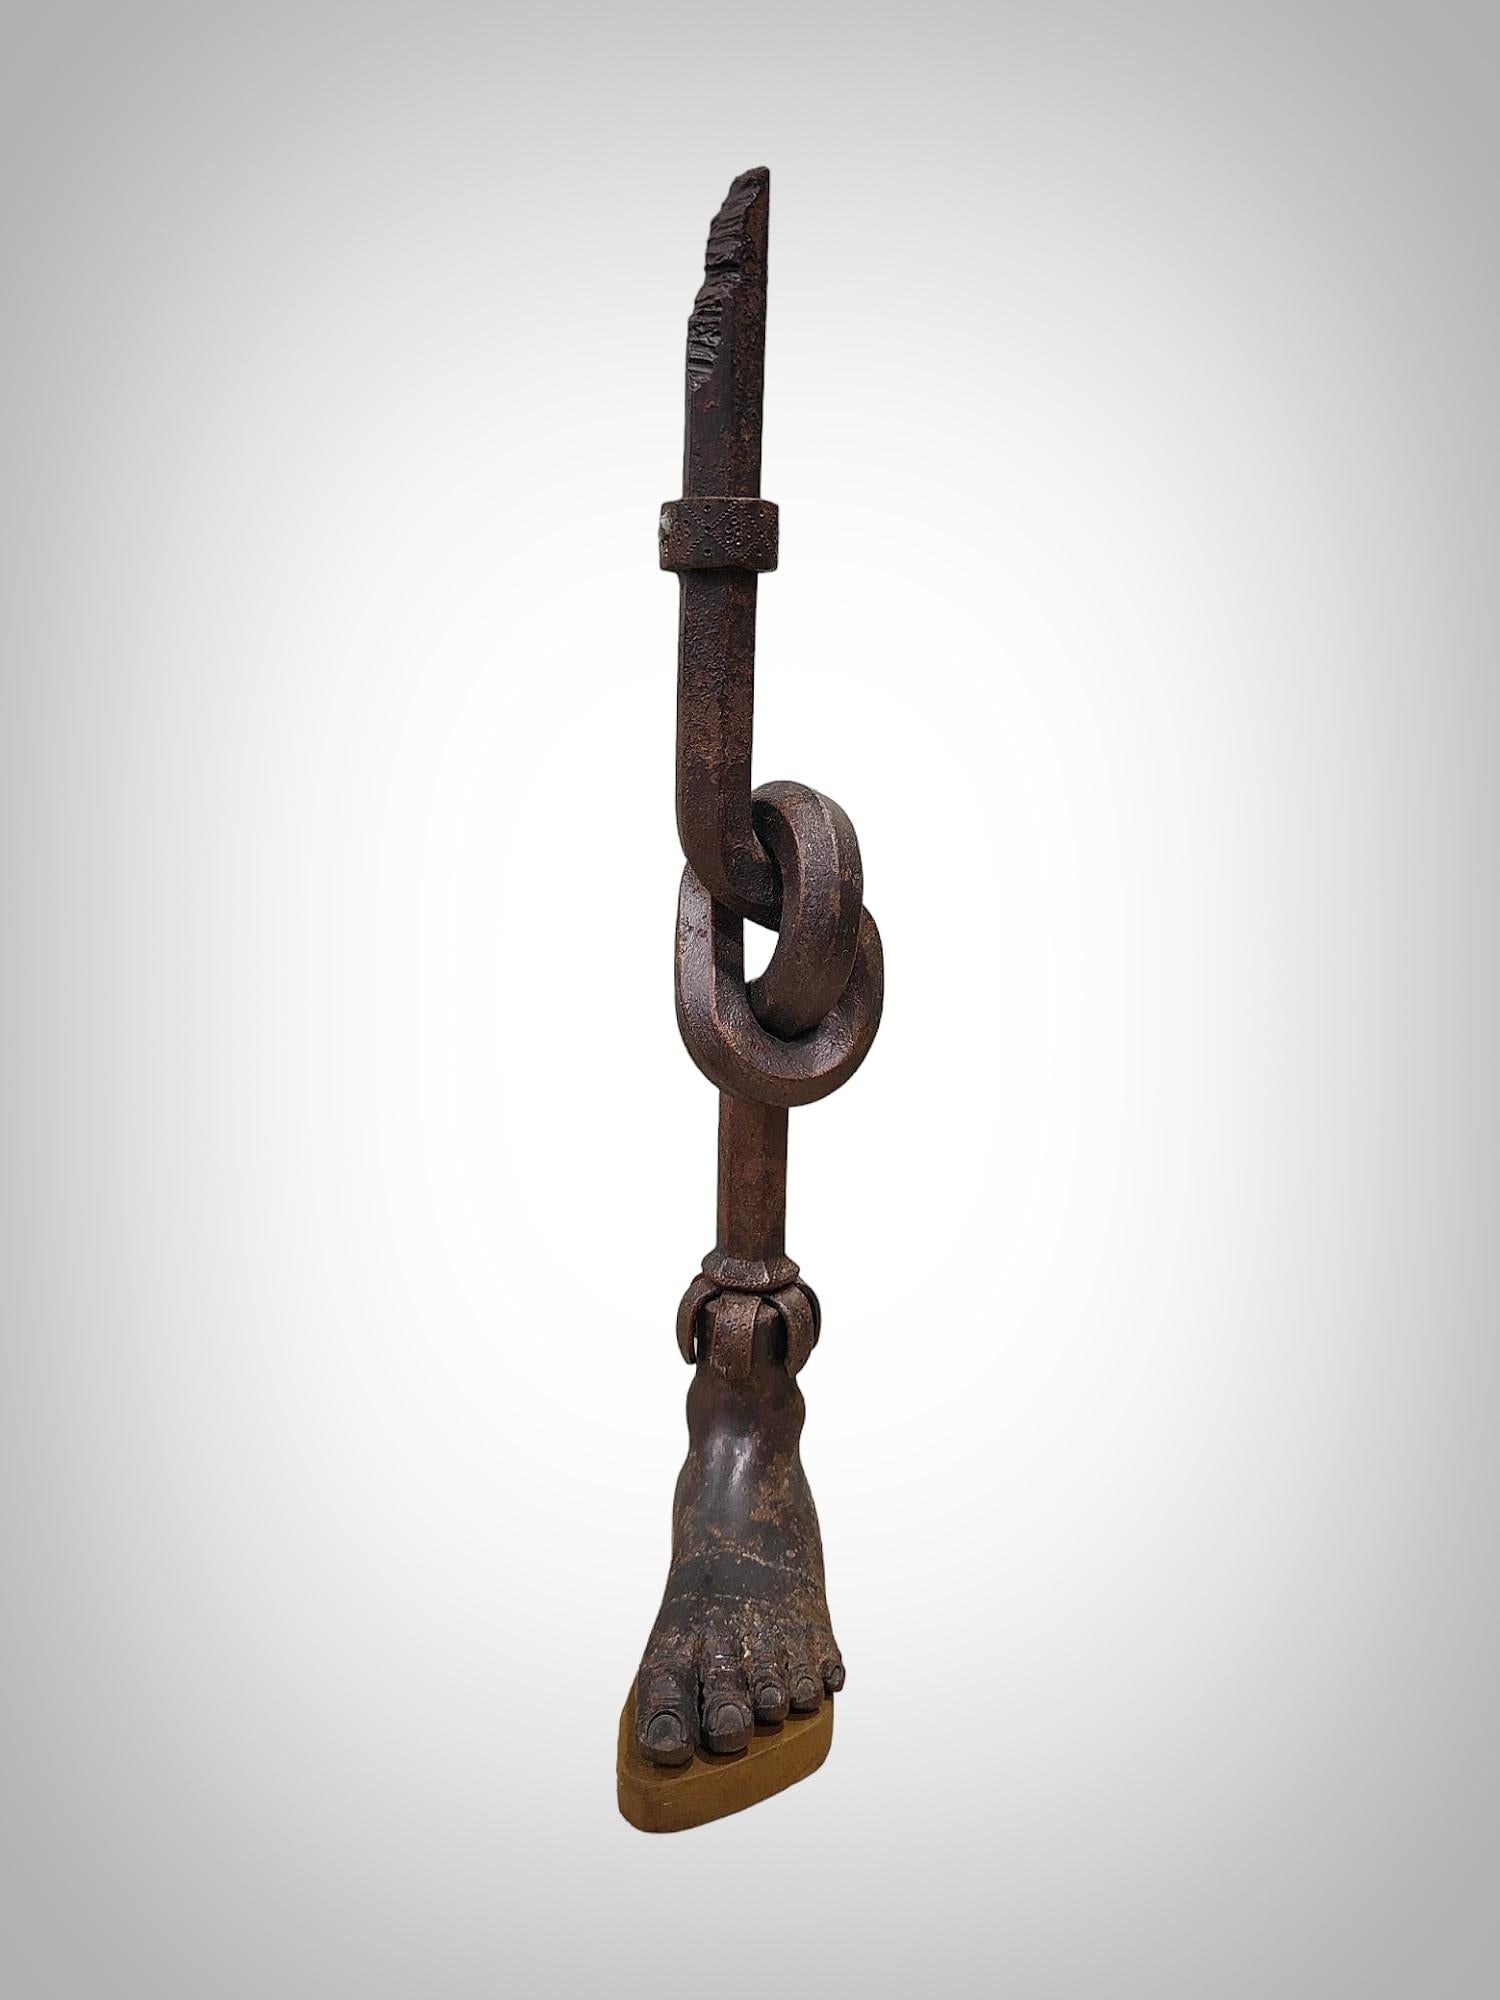 Wrought Iron  70 cm Forged Iron Sculpture - Elegant Artisan-Crafted Work at the Forge  For Sale